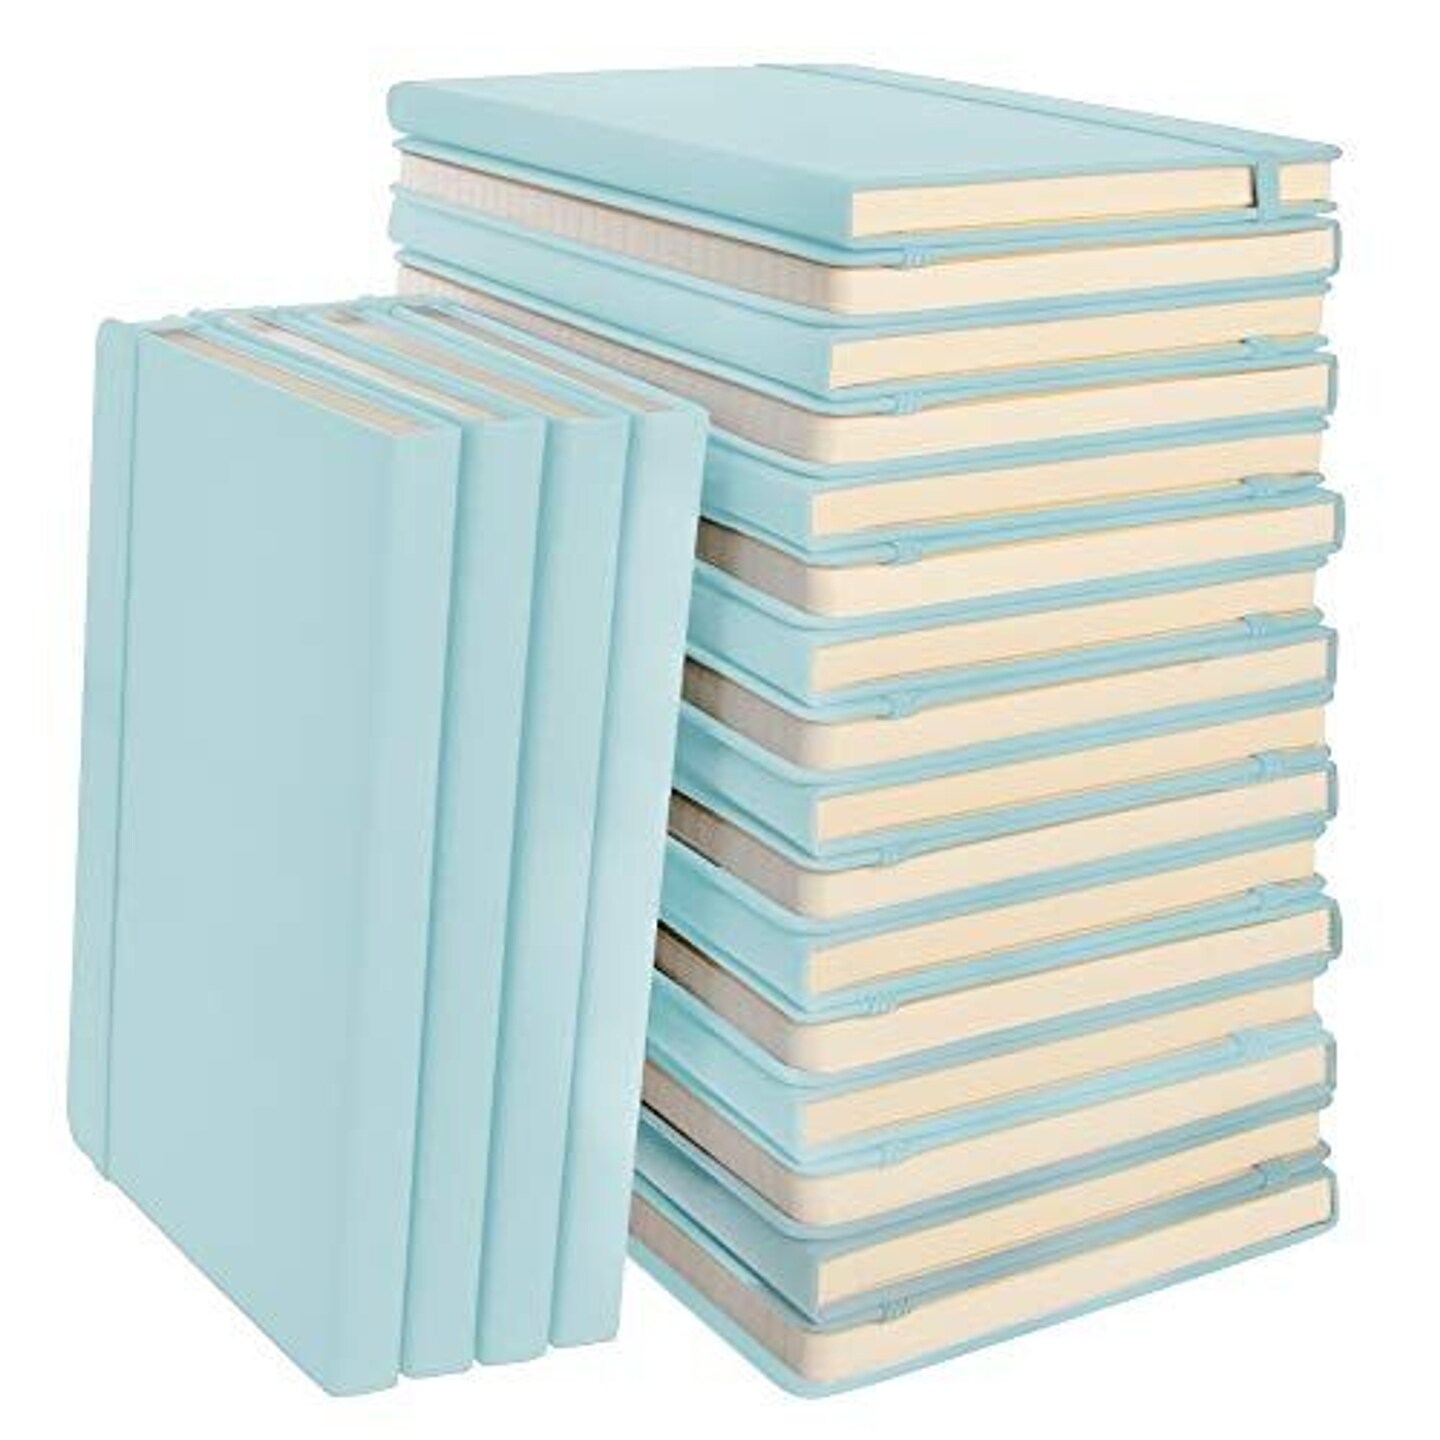 Simply Genius A5 Notebooks for Work, Travel, Business, School &#x26; More - College Ruled Notebook - Hardcover Journals for Women &#x26; Men - Lined Books with 192 pages, 5.7&#x22; x 8.4&#x22;(Light Blue, 20 Pack)